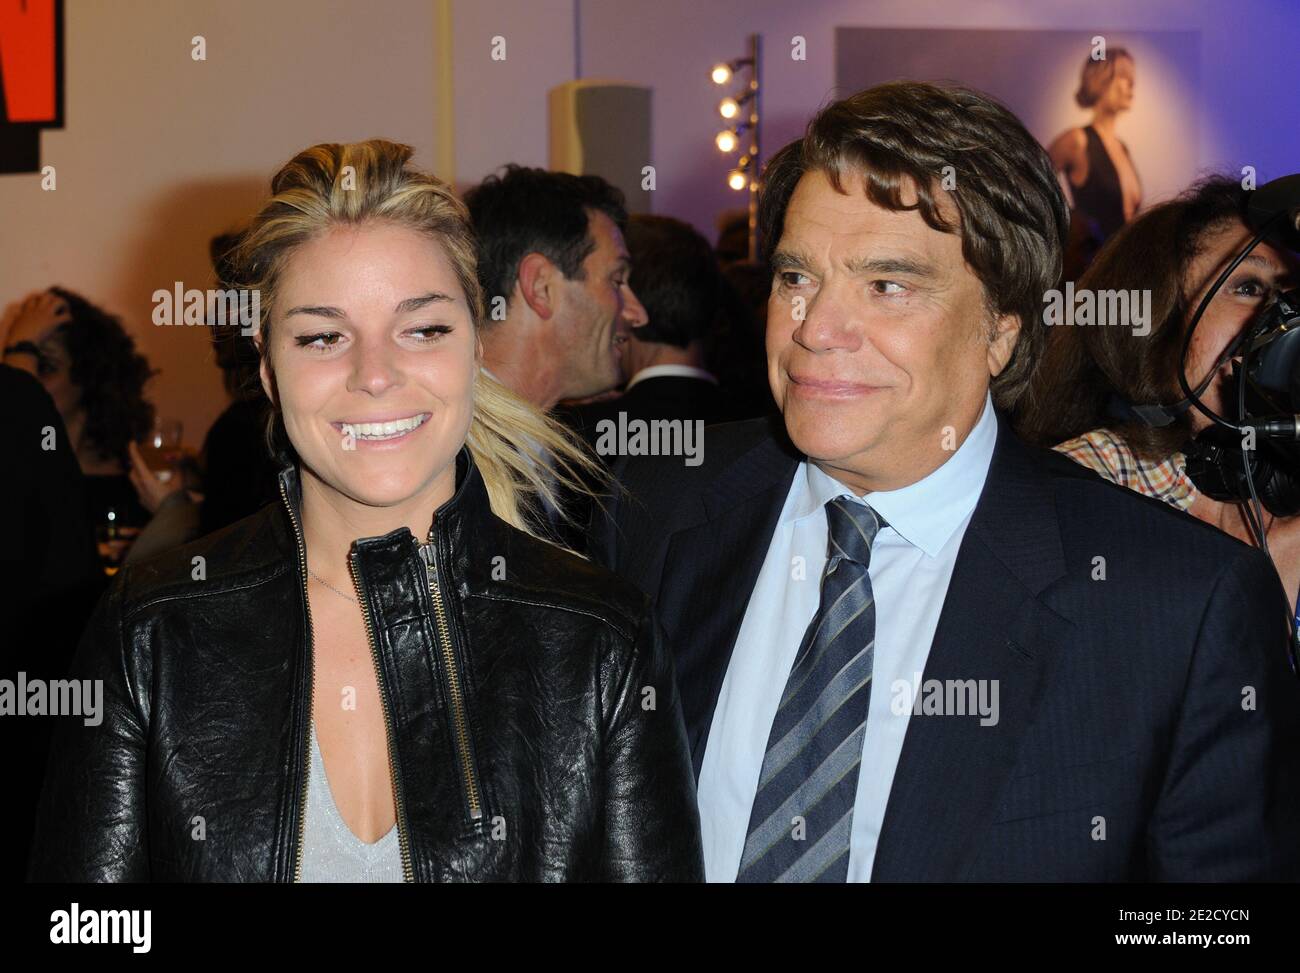 Sophie Tapie and Bernard Tapie attending the 'Look' Boutique Opening party  in Paris, France on October 17, 2011. Photo by Alban Wyters/ABACAPRESS.COM  Stock Photo - Alamy